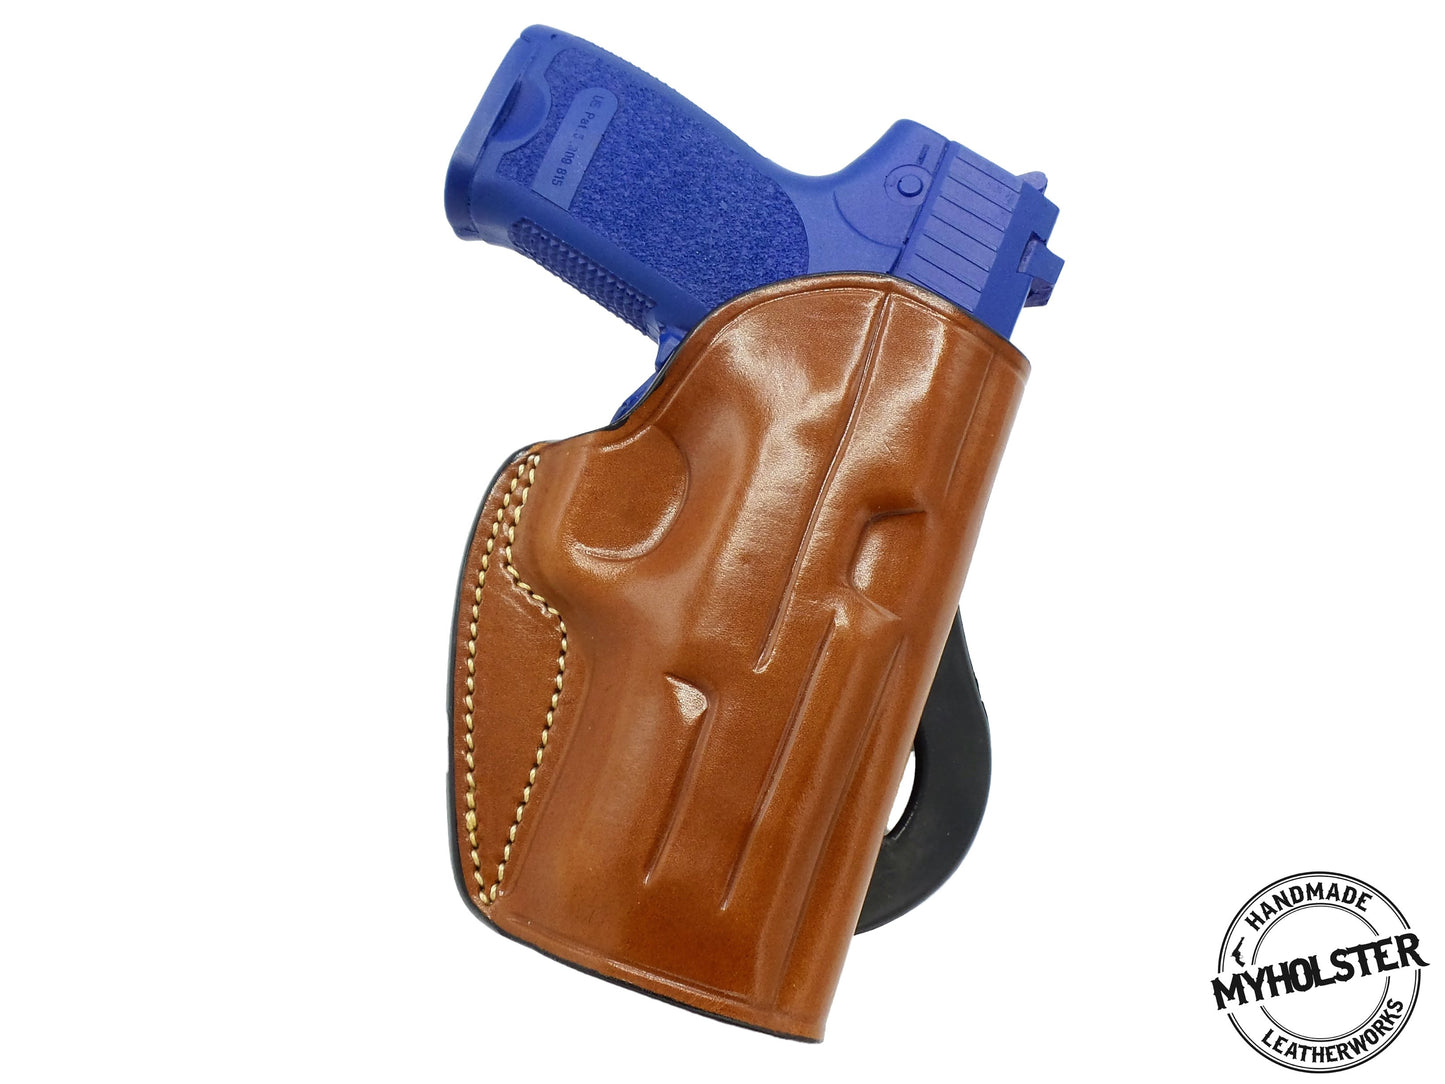 GLOCK 19 GEN 5 Compact OWB Leather Quick Draw Paddle Holster